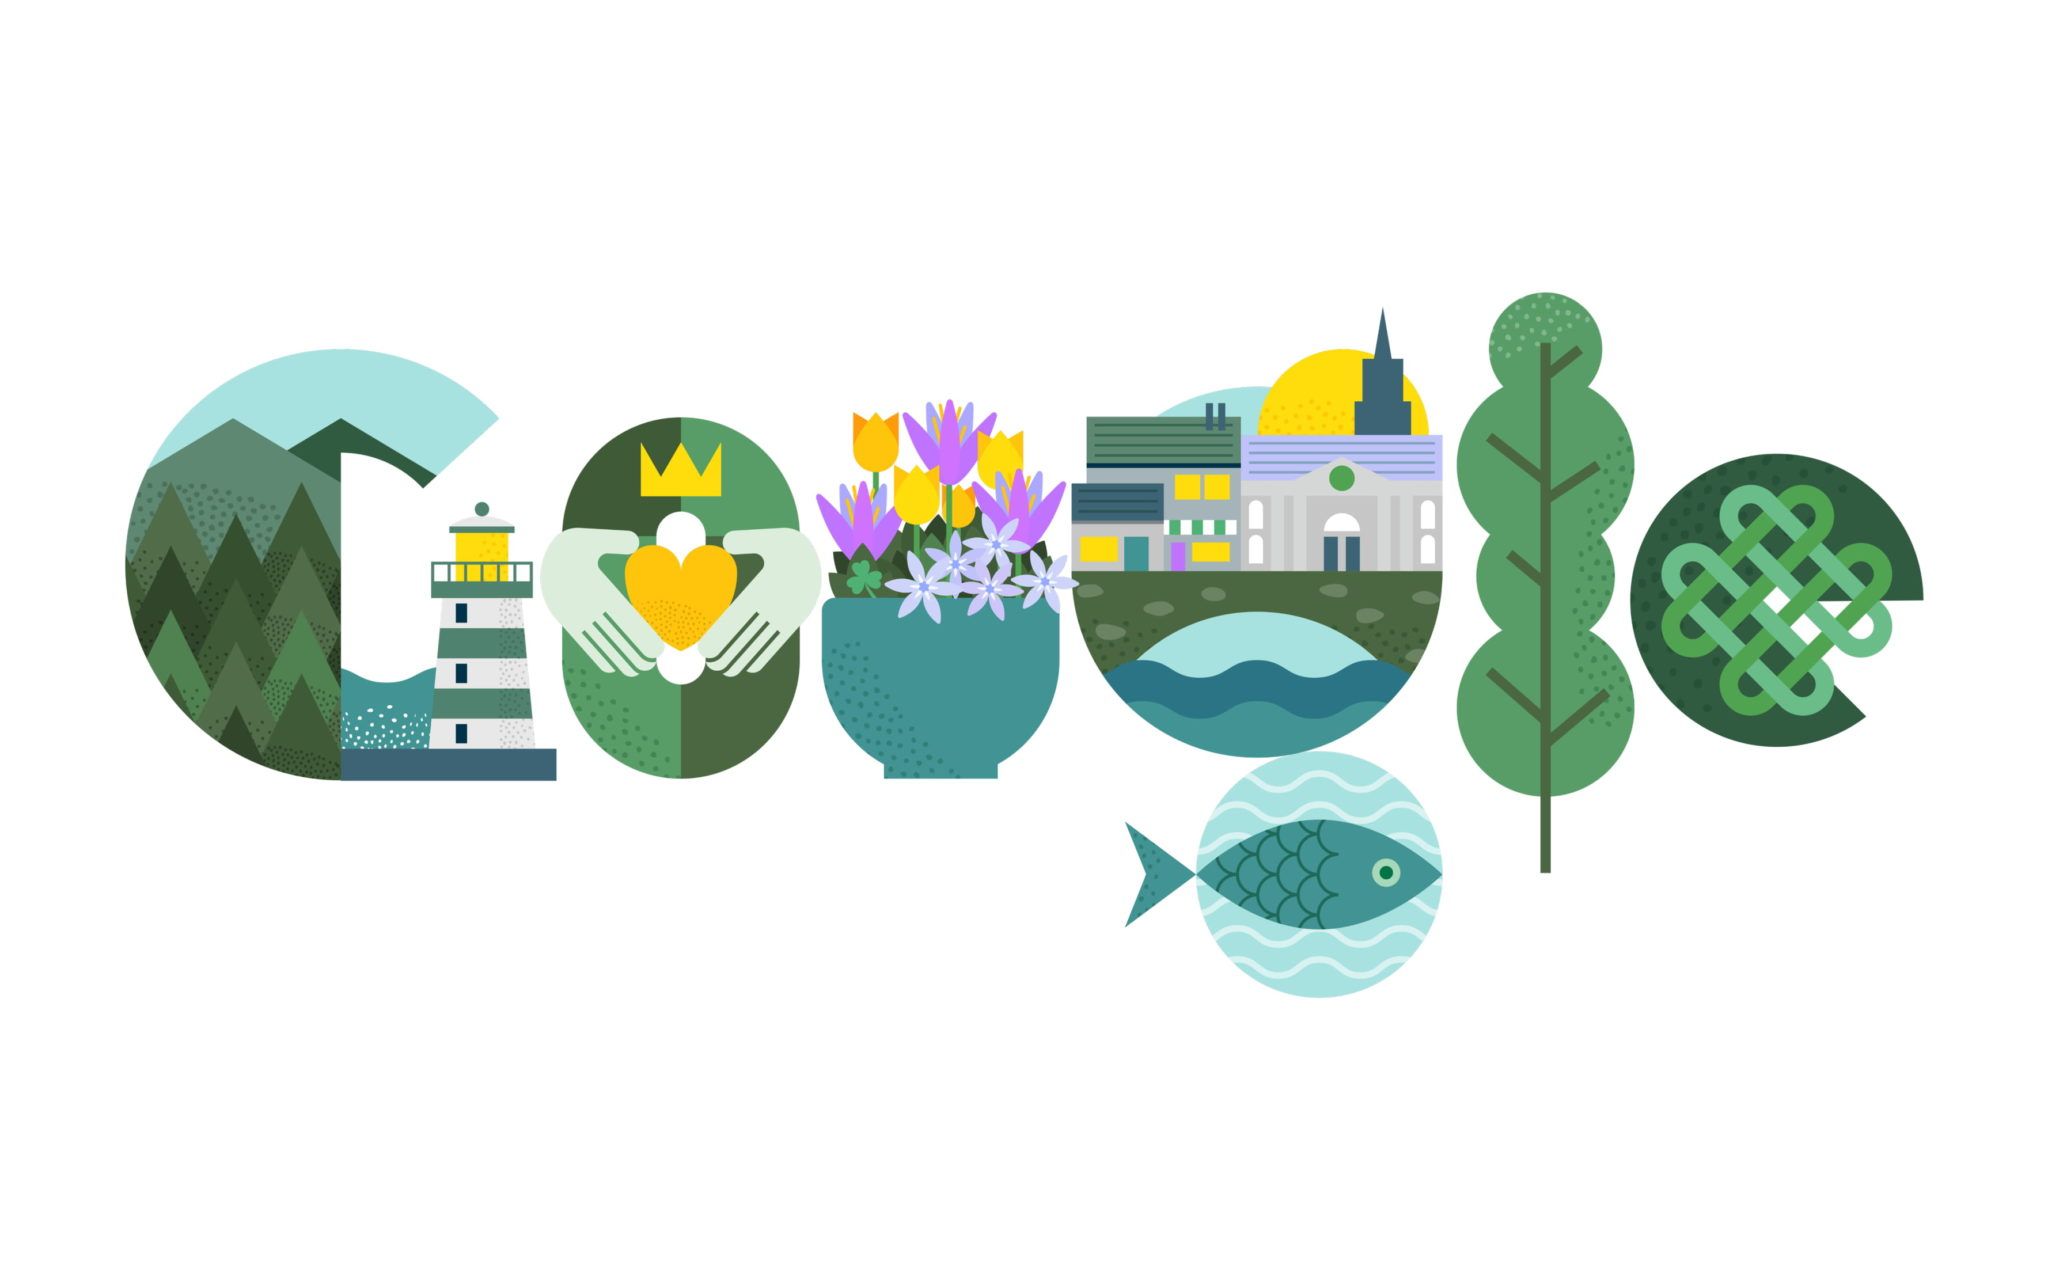 Google unveil new Doodle designed by an Irish artist for St. Patrick’s Day